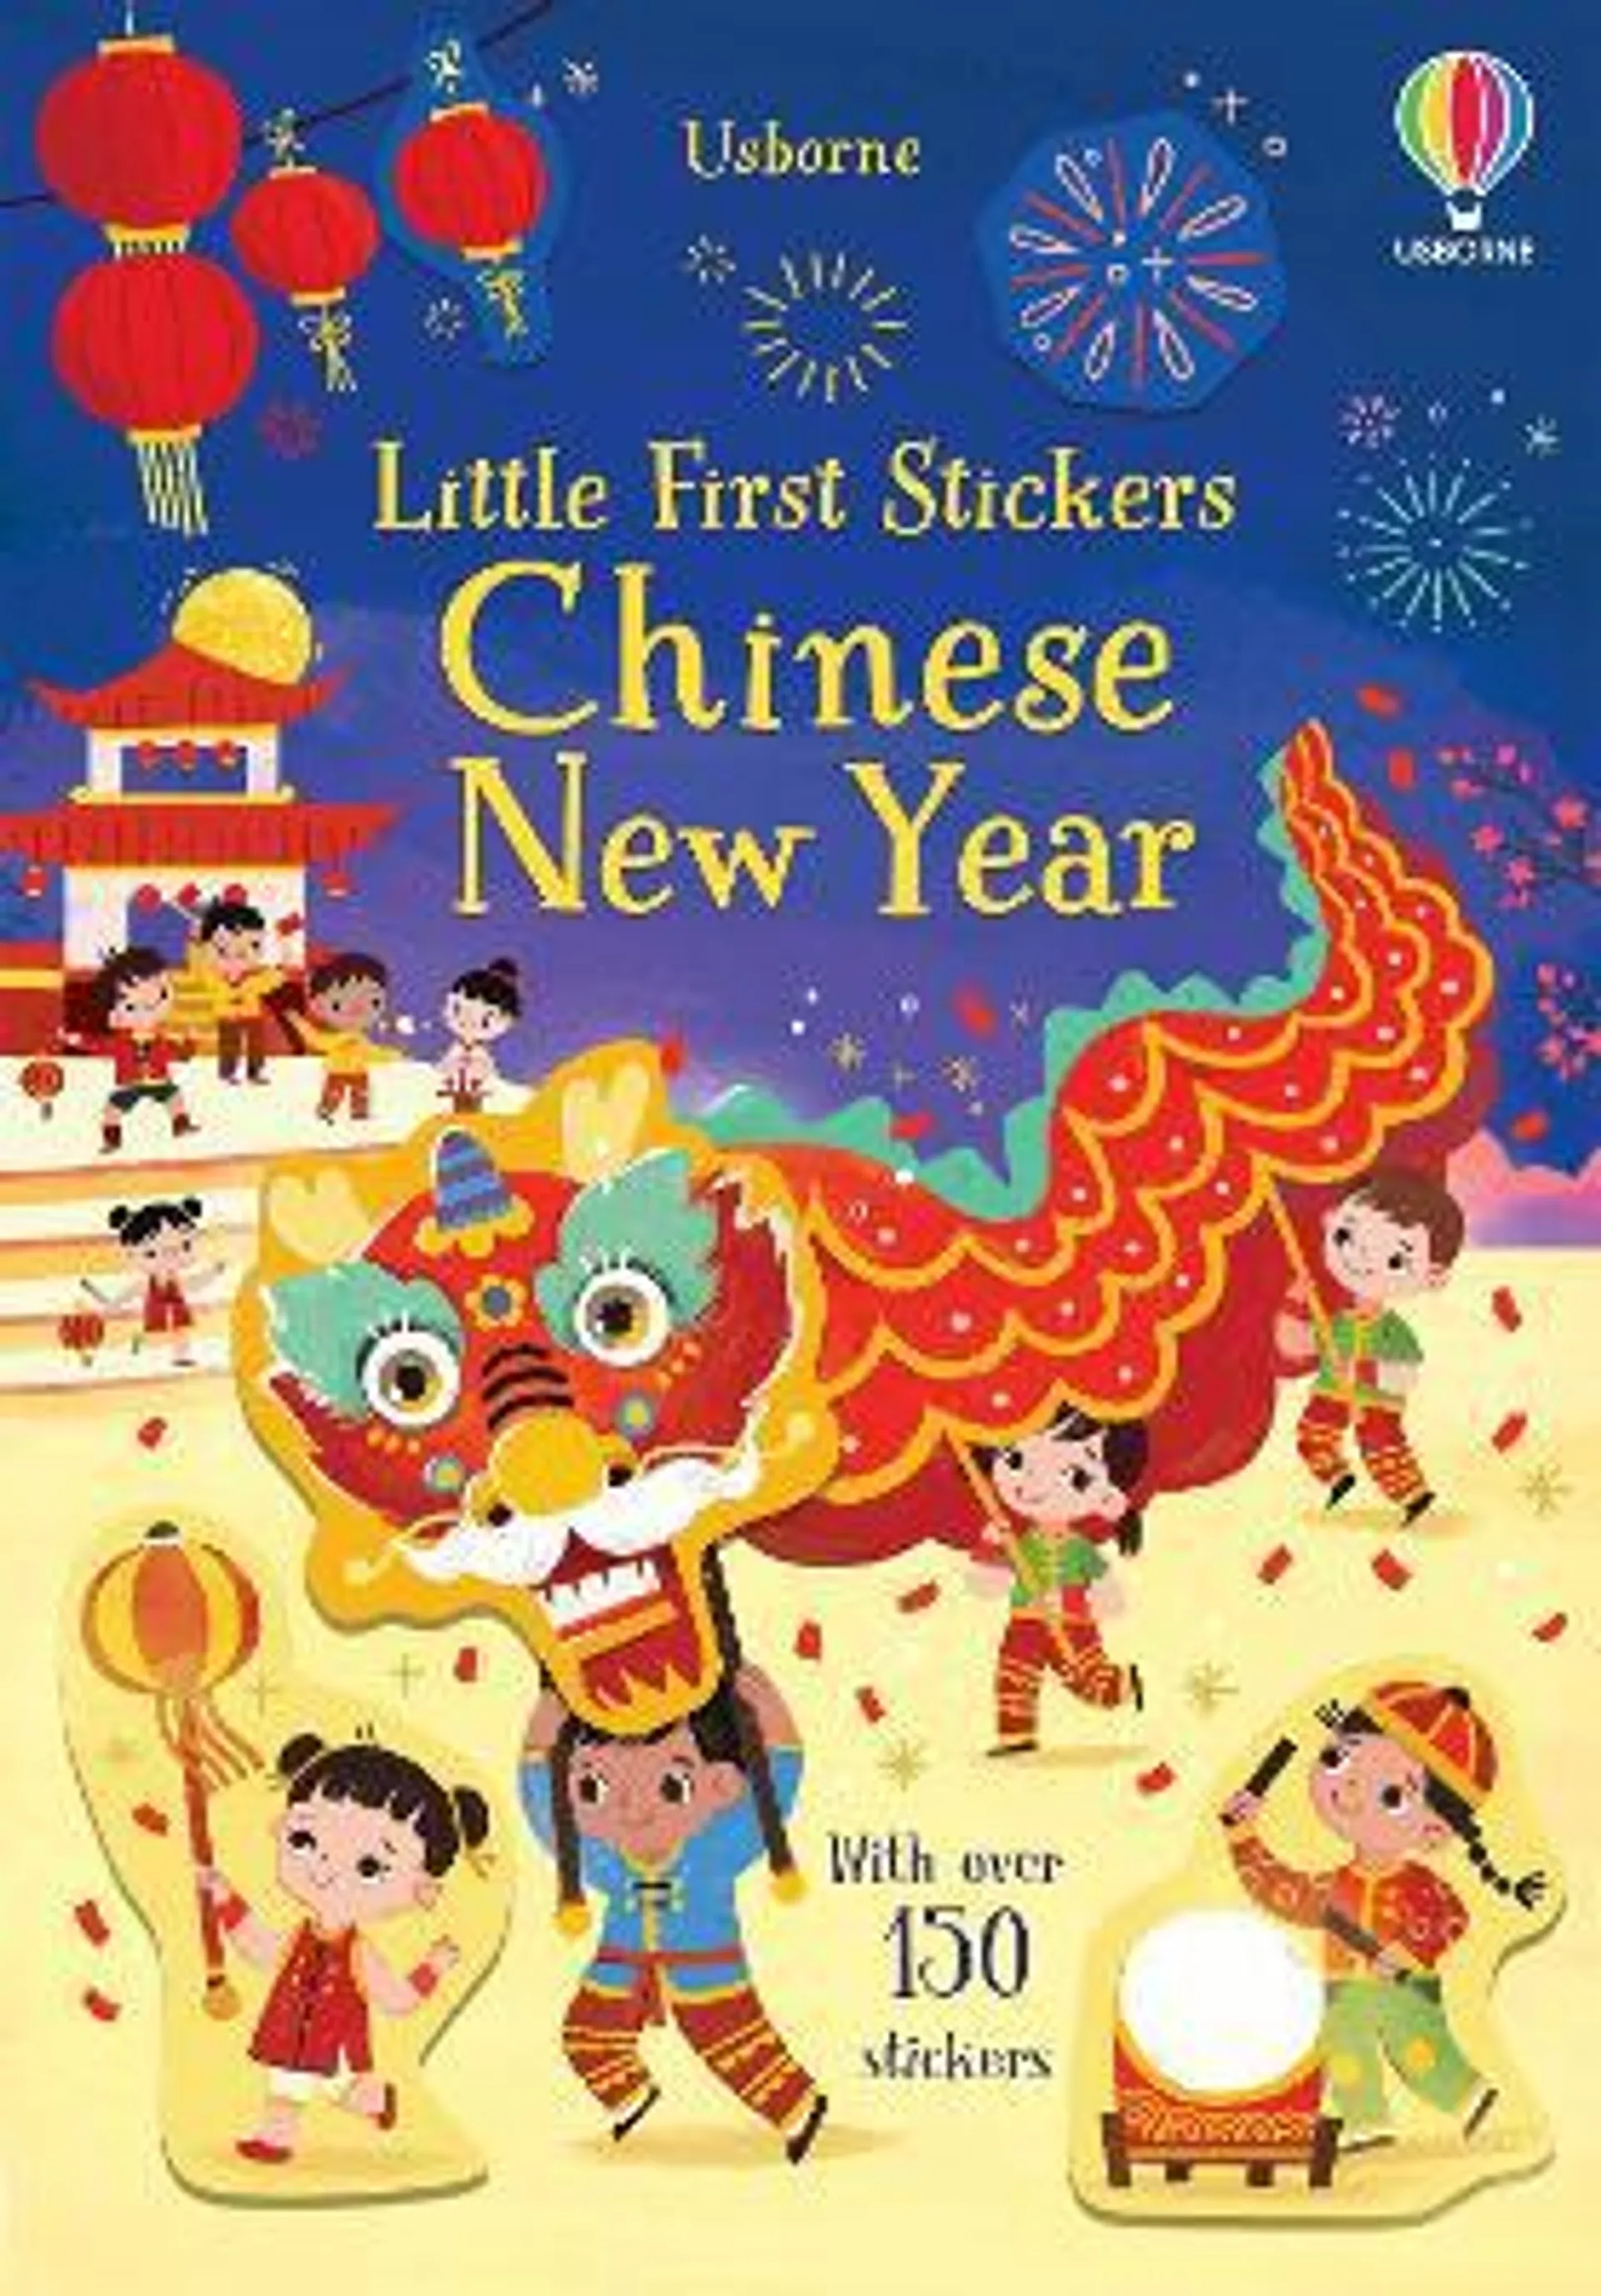 Little First Stickers Chinese New Year - Little First Stickers (Paperback)